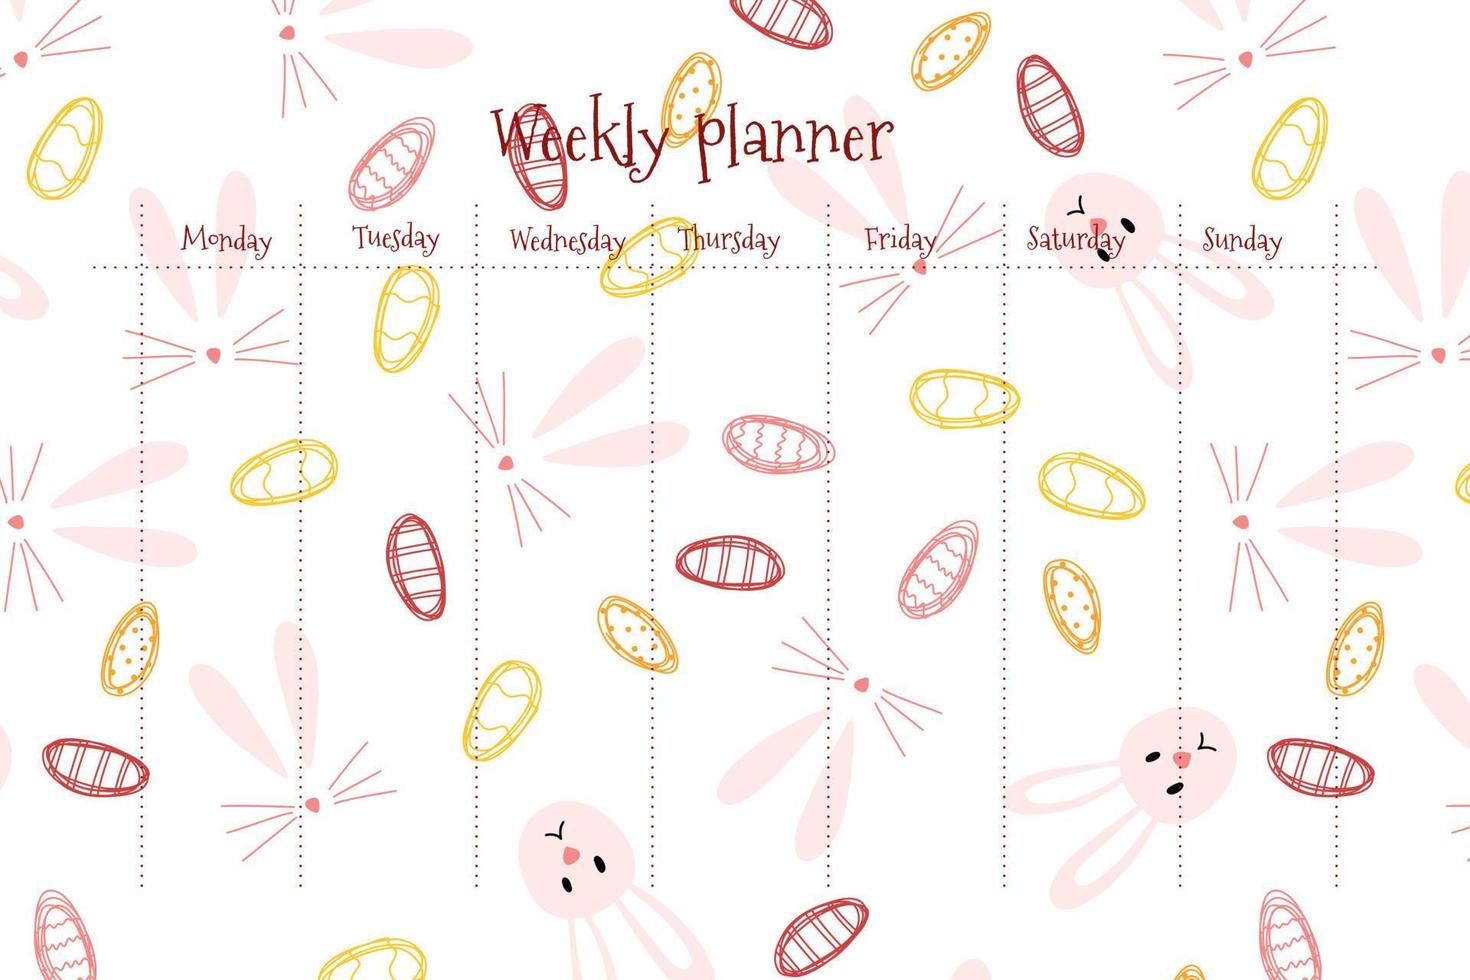 Weekly and daily planner with cute Easter bunny and egg in cartoon flat style. Colorful vector illustration for stationary, schedule, list, school timetable, extracurricular activities.